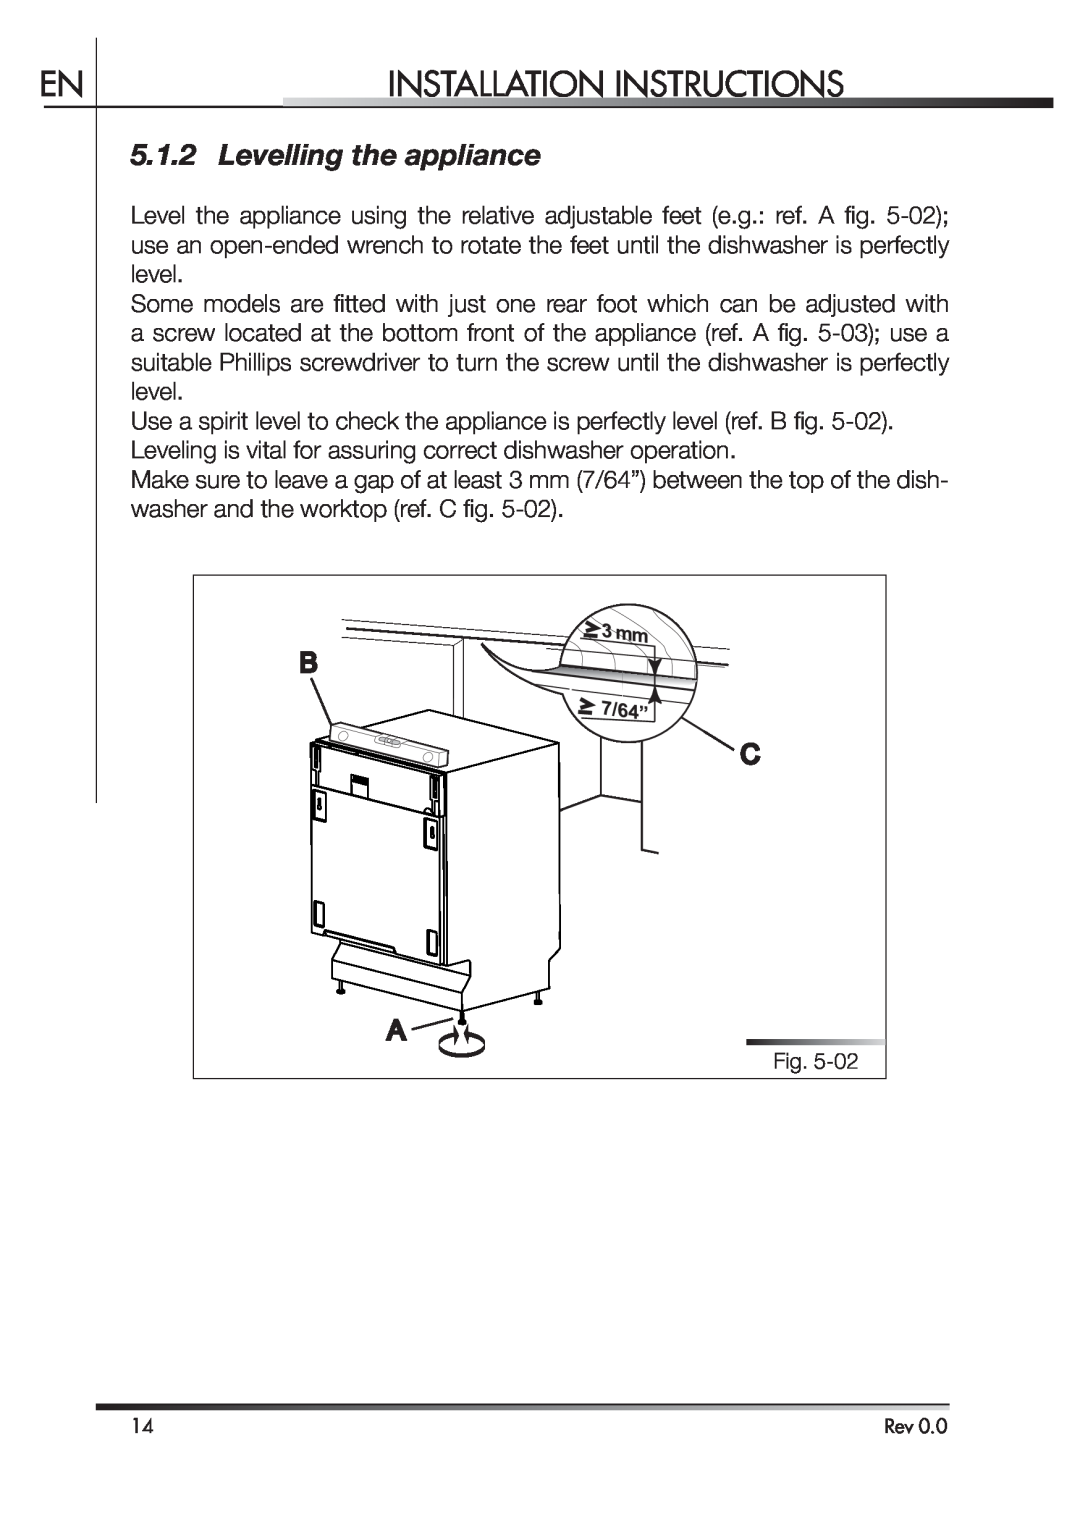 Smeg STA4645 instruction manual Levelling the appliance, Installation Instructions 